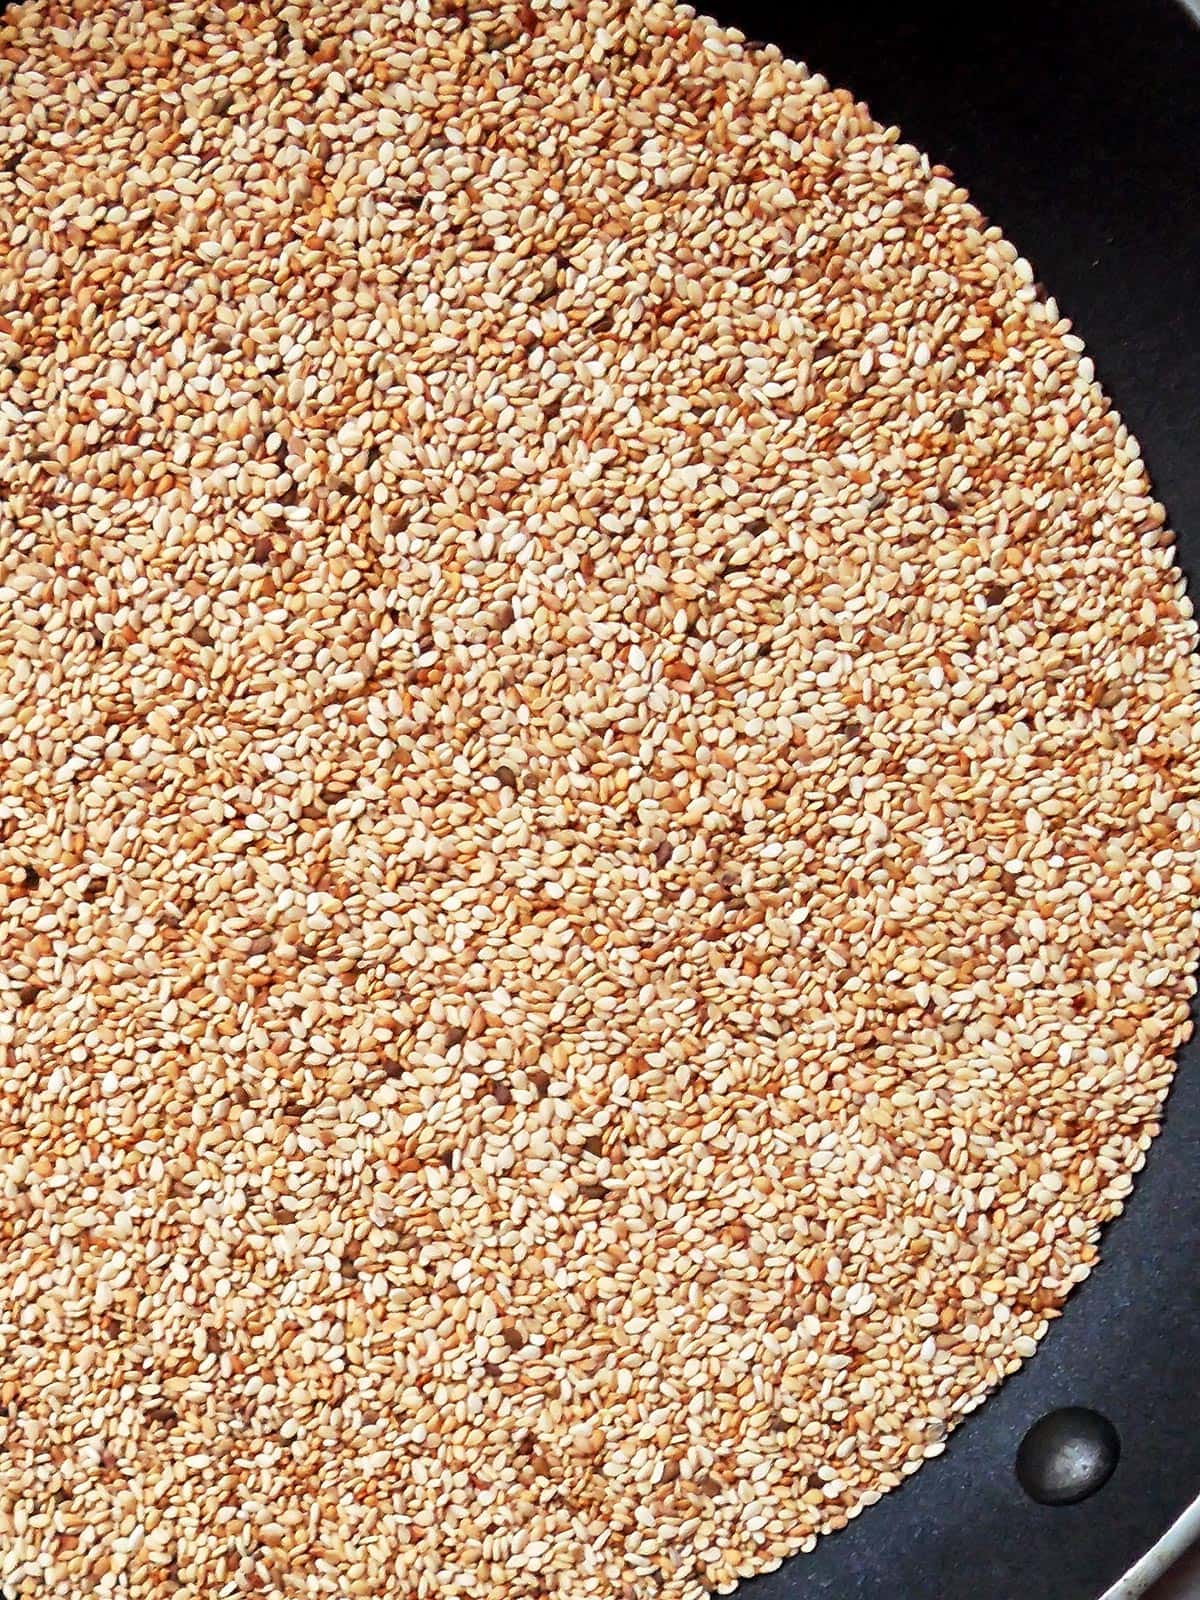 Toasted Sesame Seeds in Pan